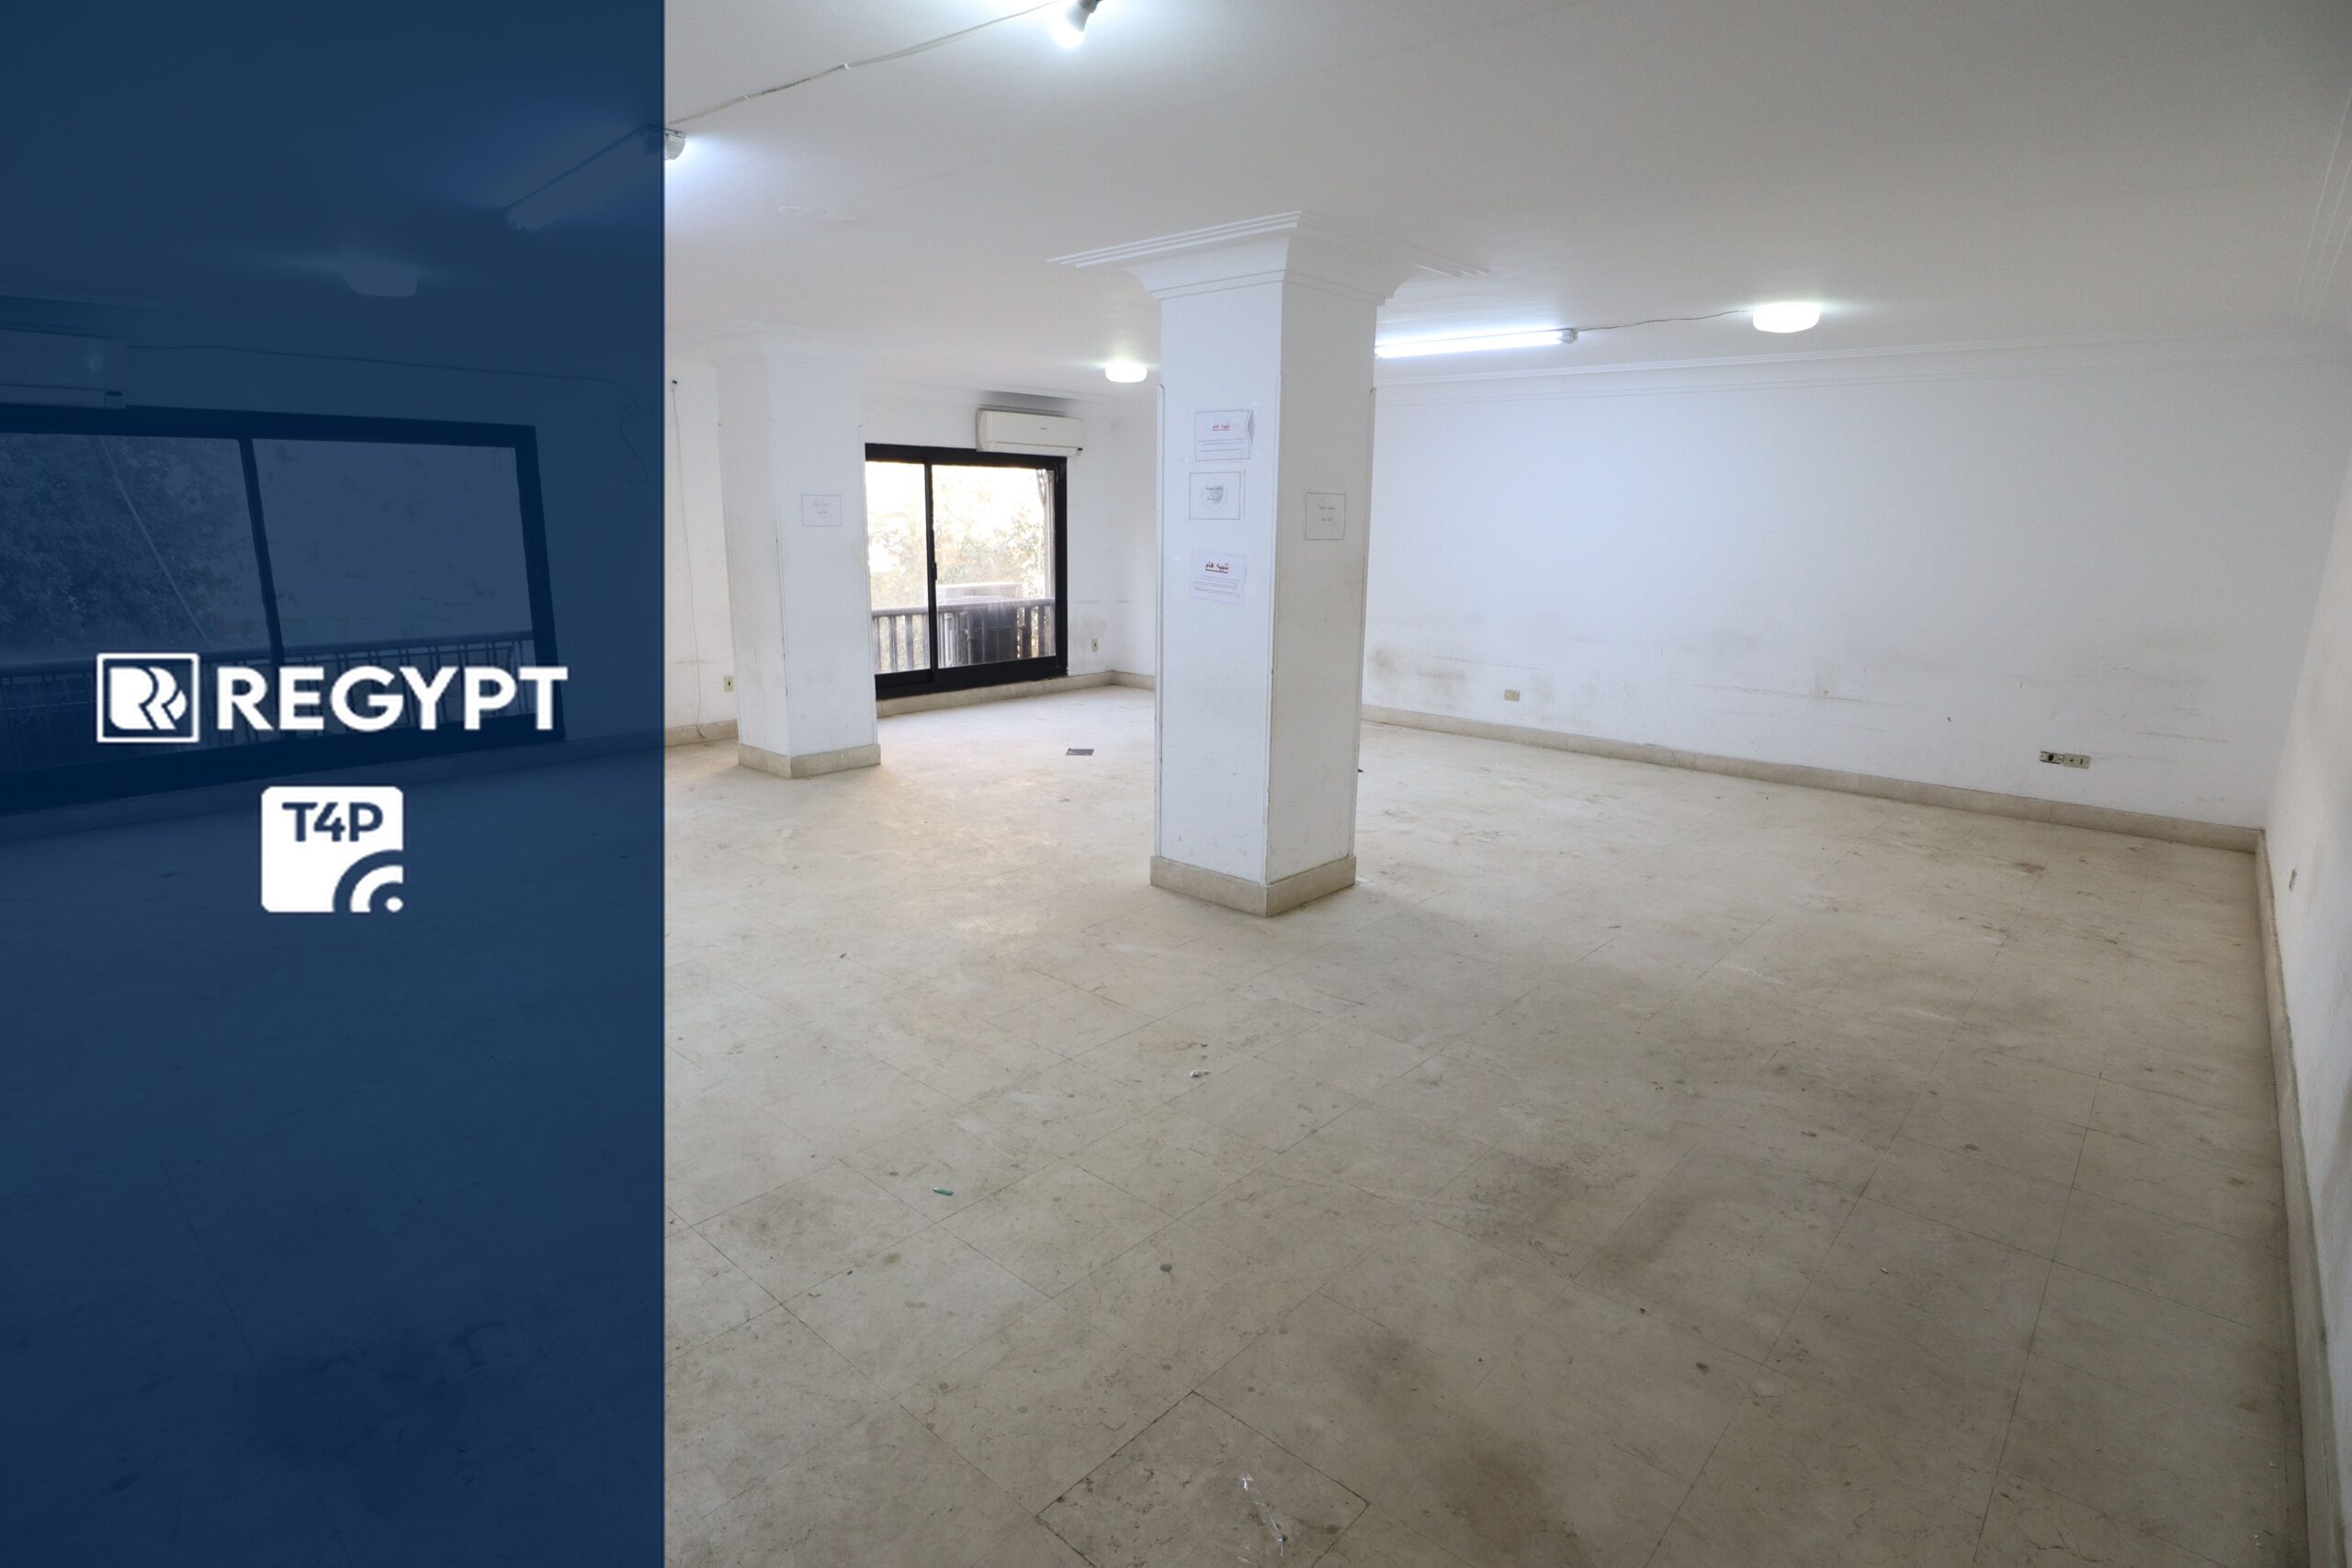 Office SPACE FOR RENT IN DEGLA